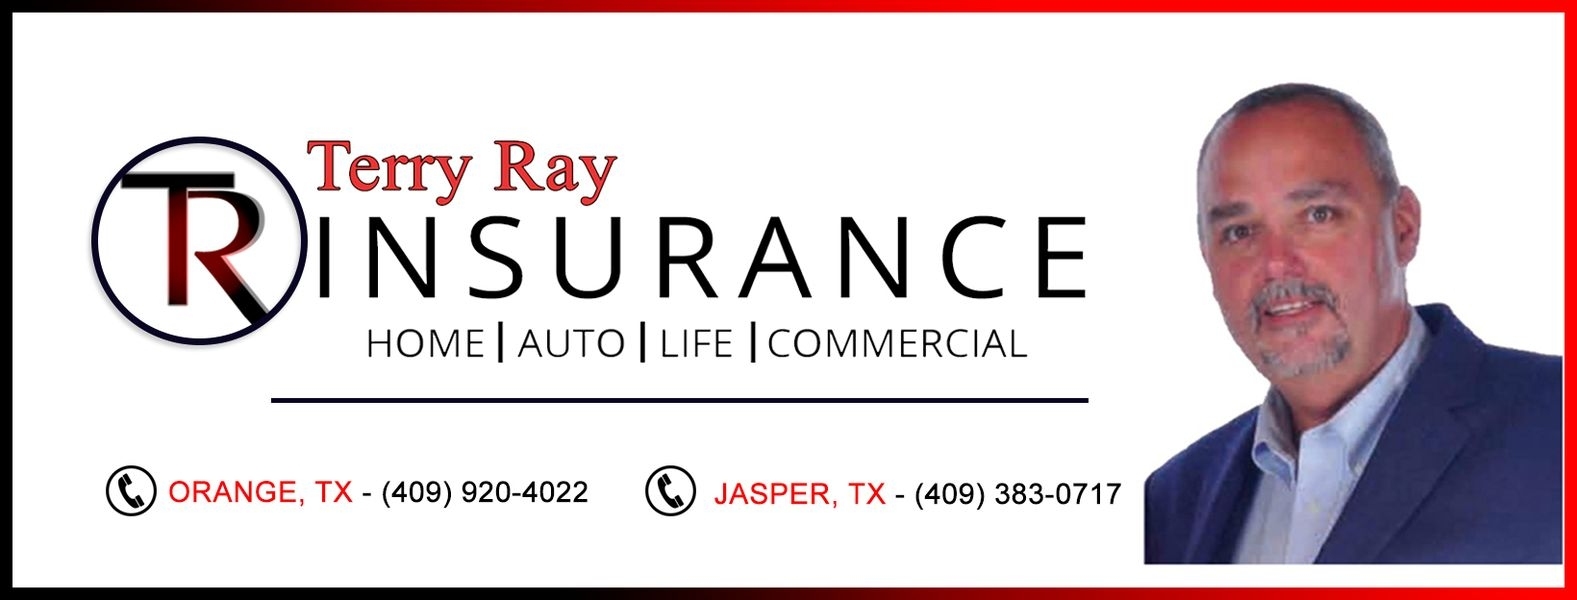 Banner of Terry Ray